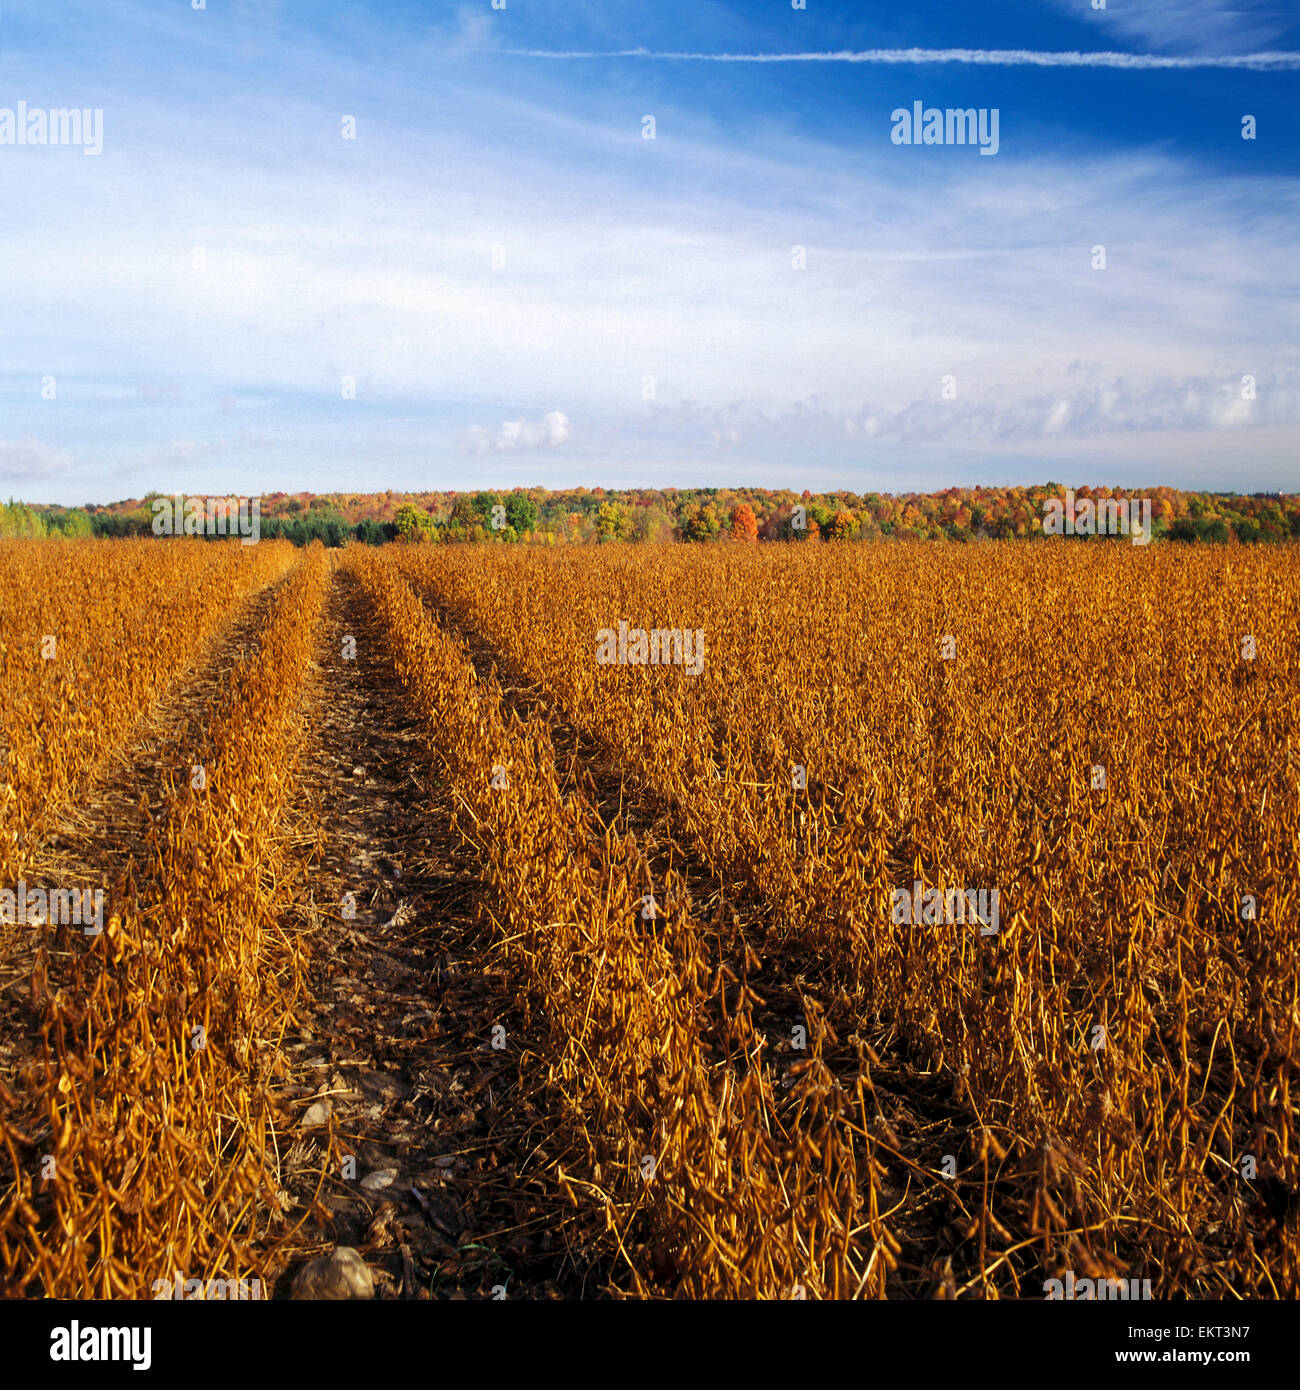 Agriculture - Field of mature harvest ready soybeans with a hillside of Autumn colors in the background / Ontario, Canada. Stock Photo